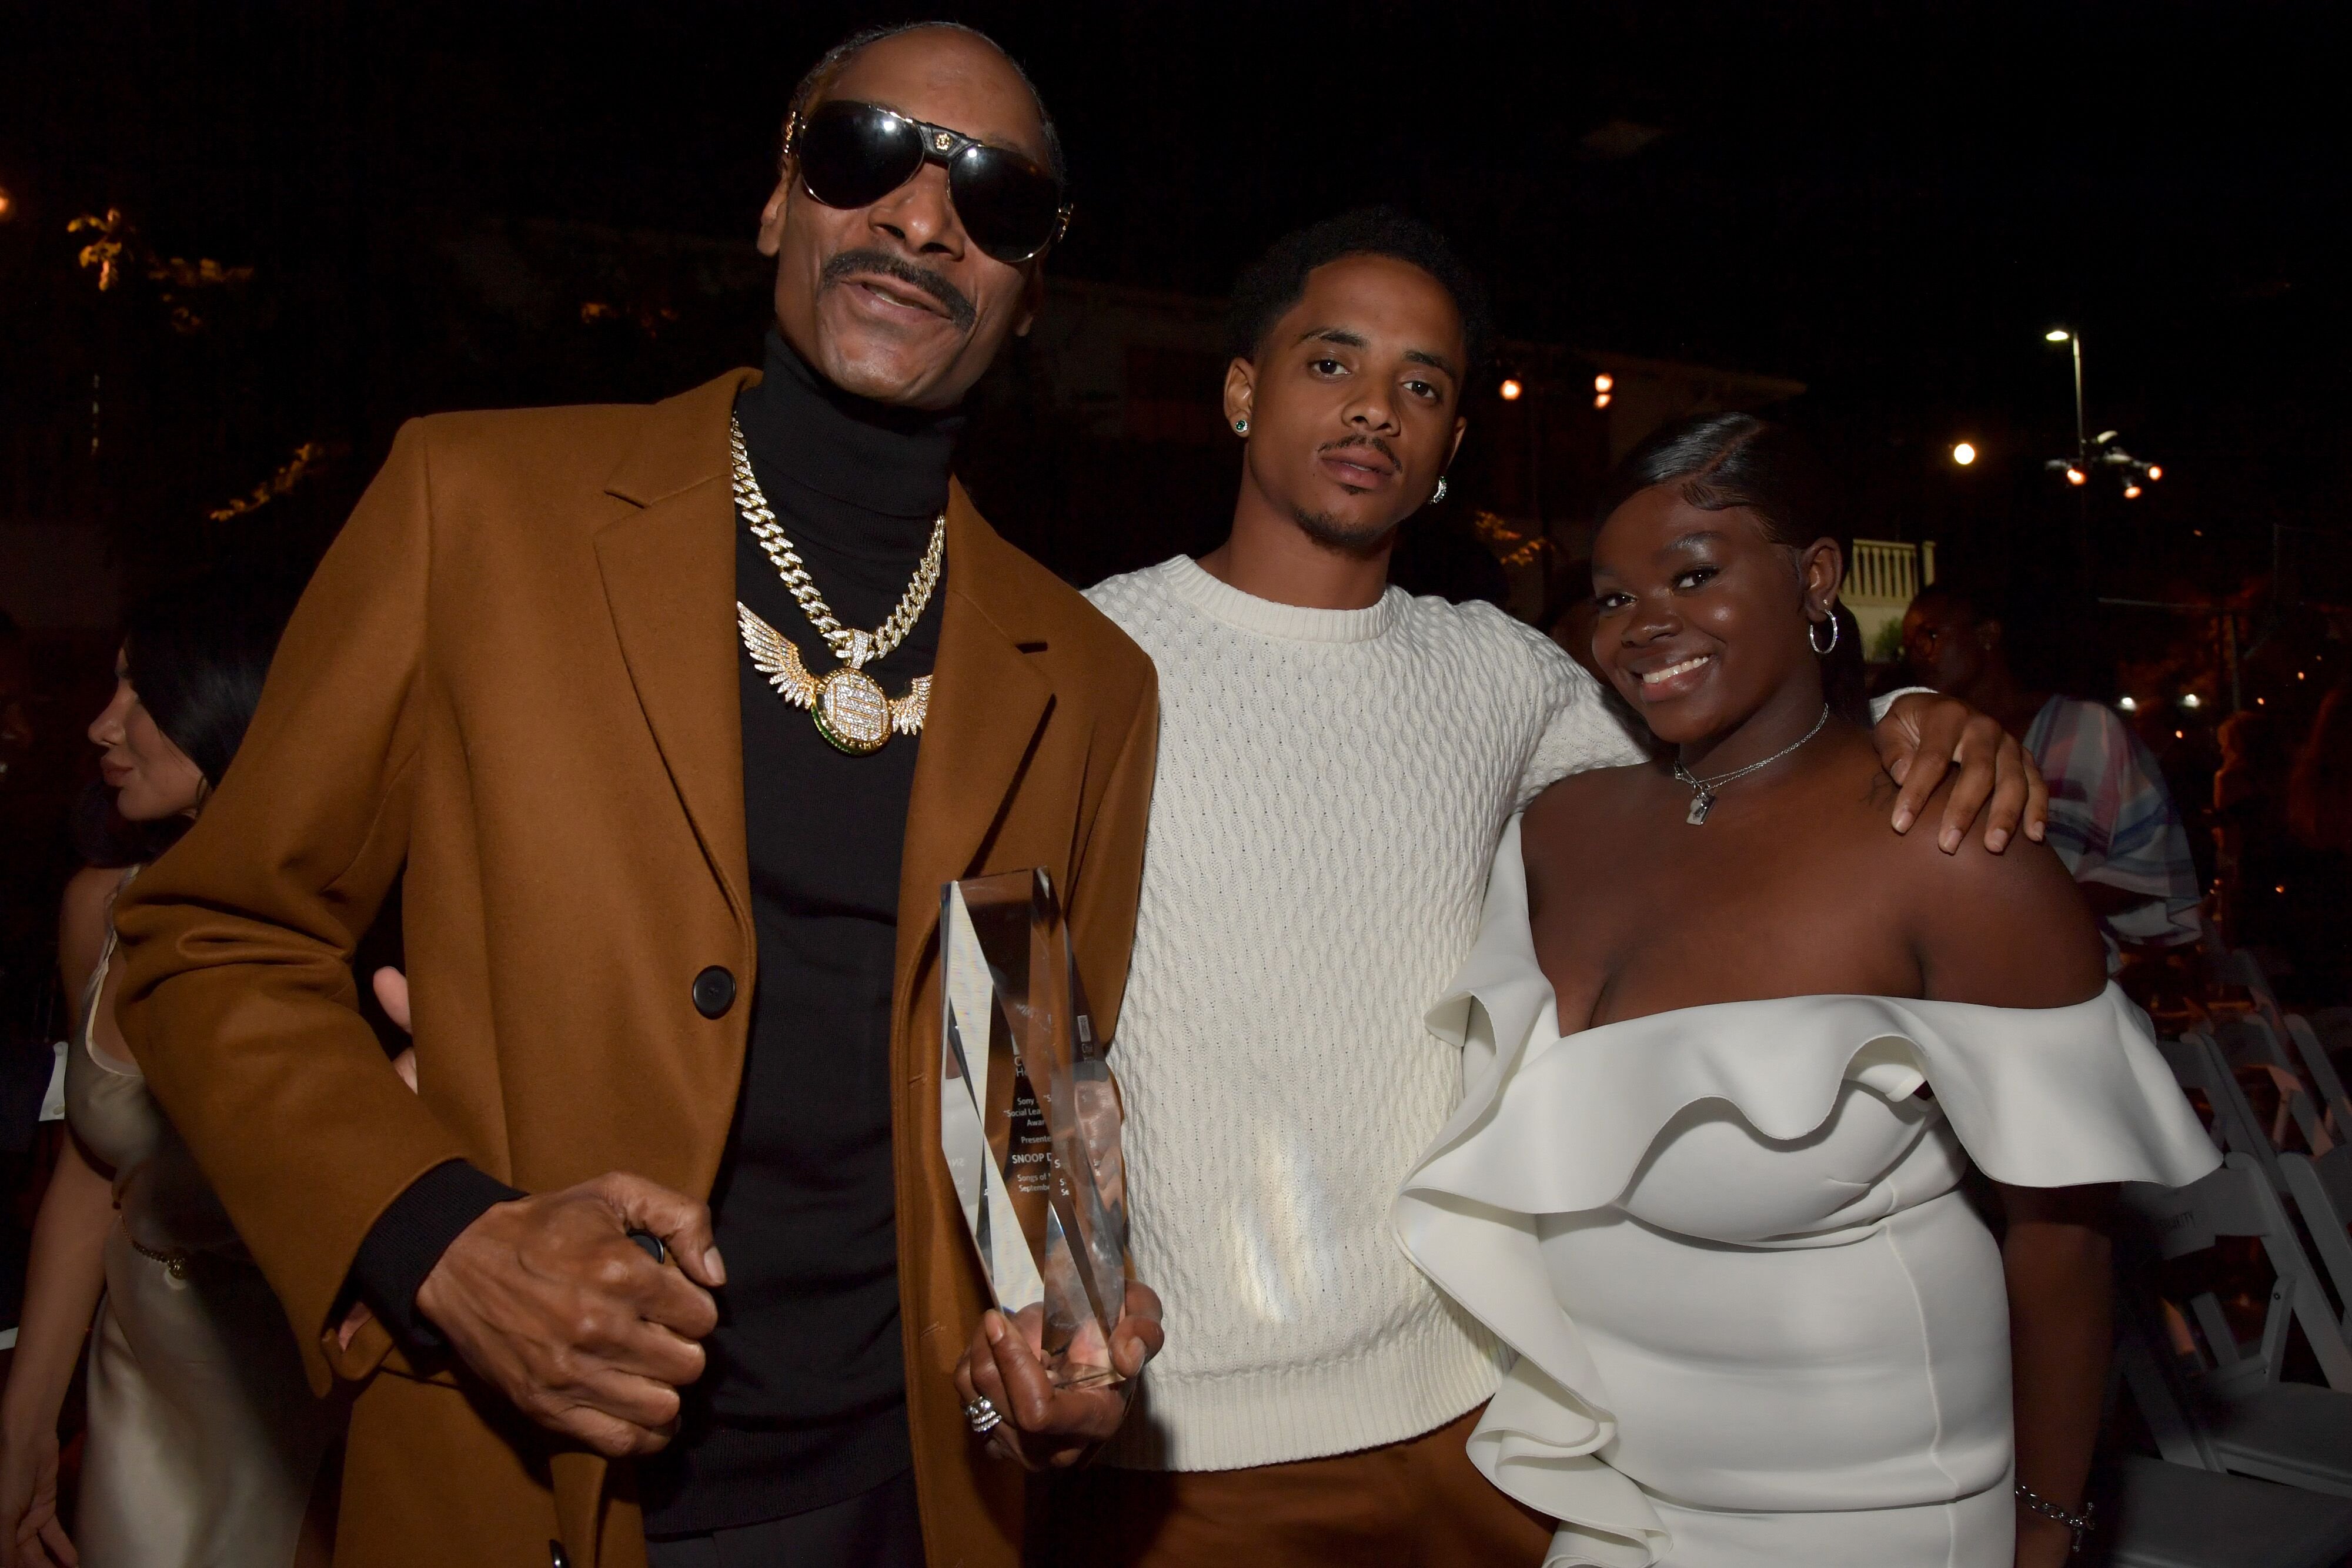 Snoop Dogg and his children attend a red carpet event together | Source: Getty Images/GlobalImagesUkraine